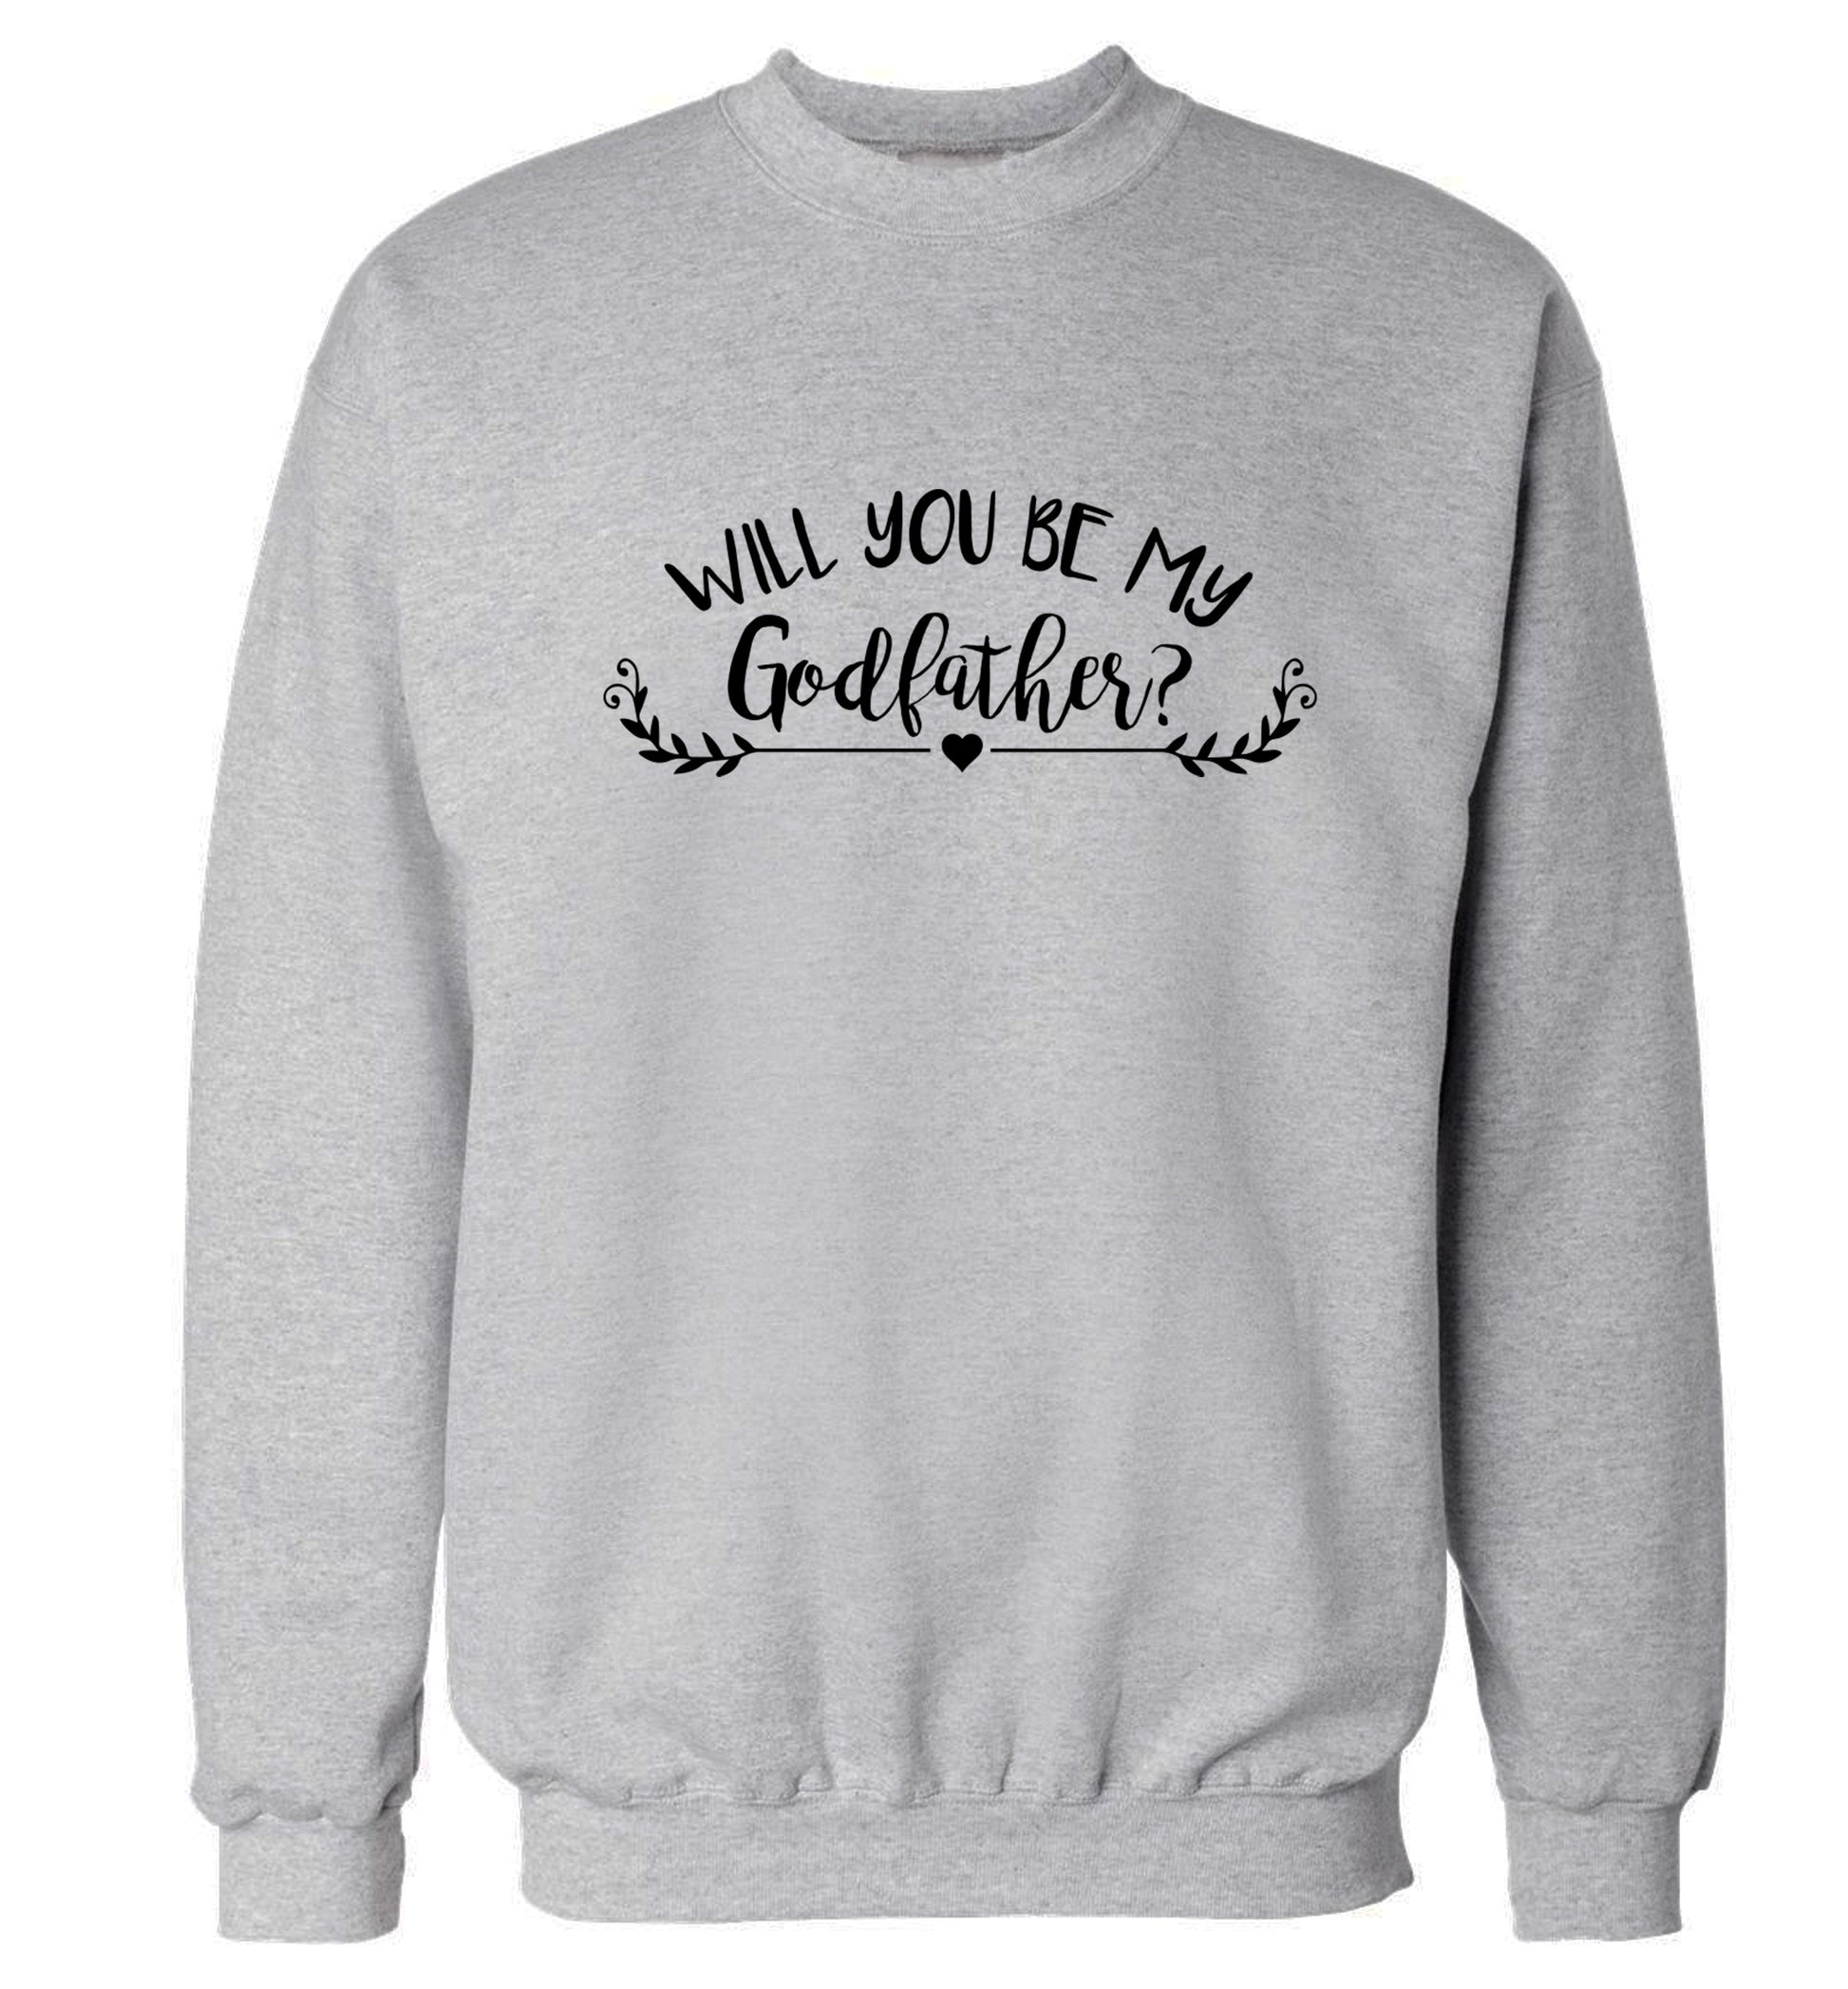 Will you be my godfather? Adult's unisex grey Sweater 2XL